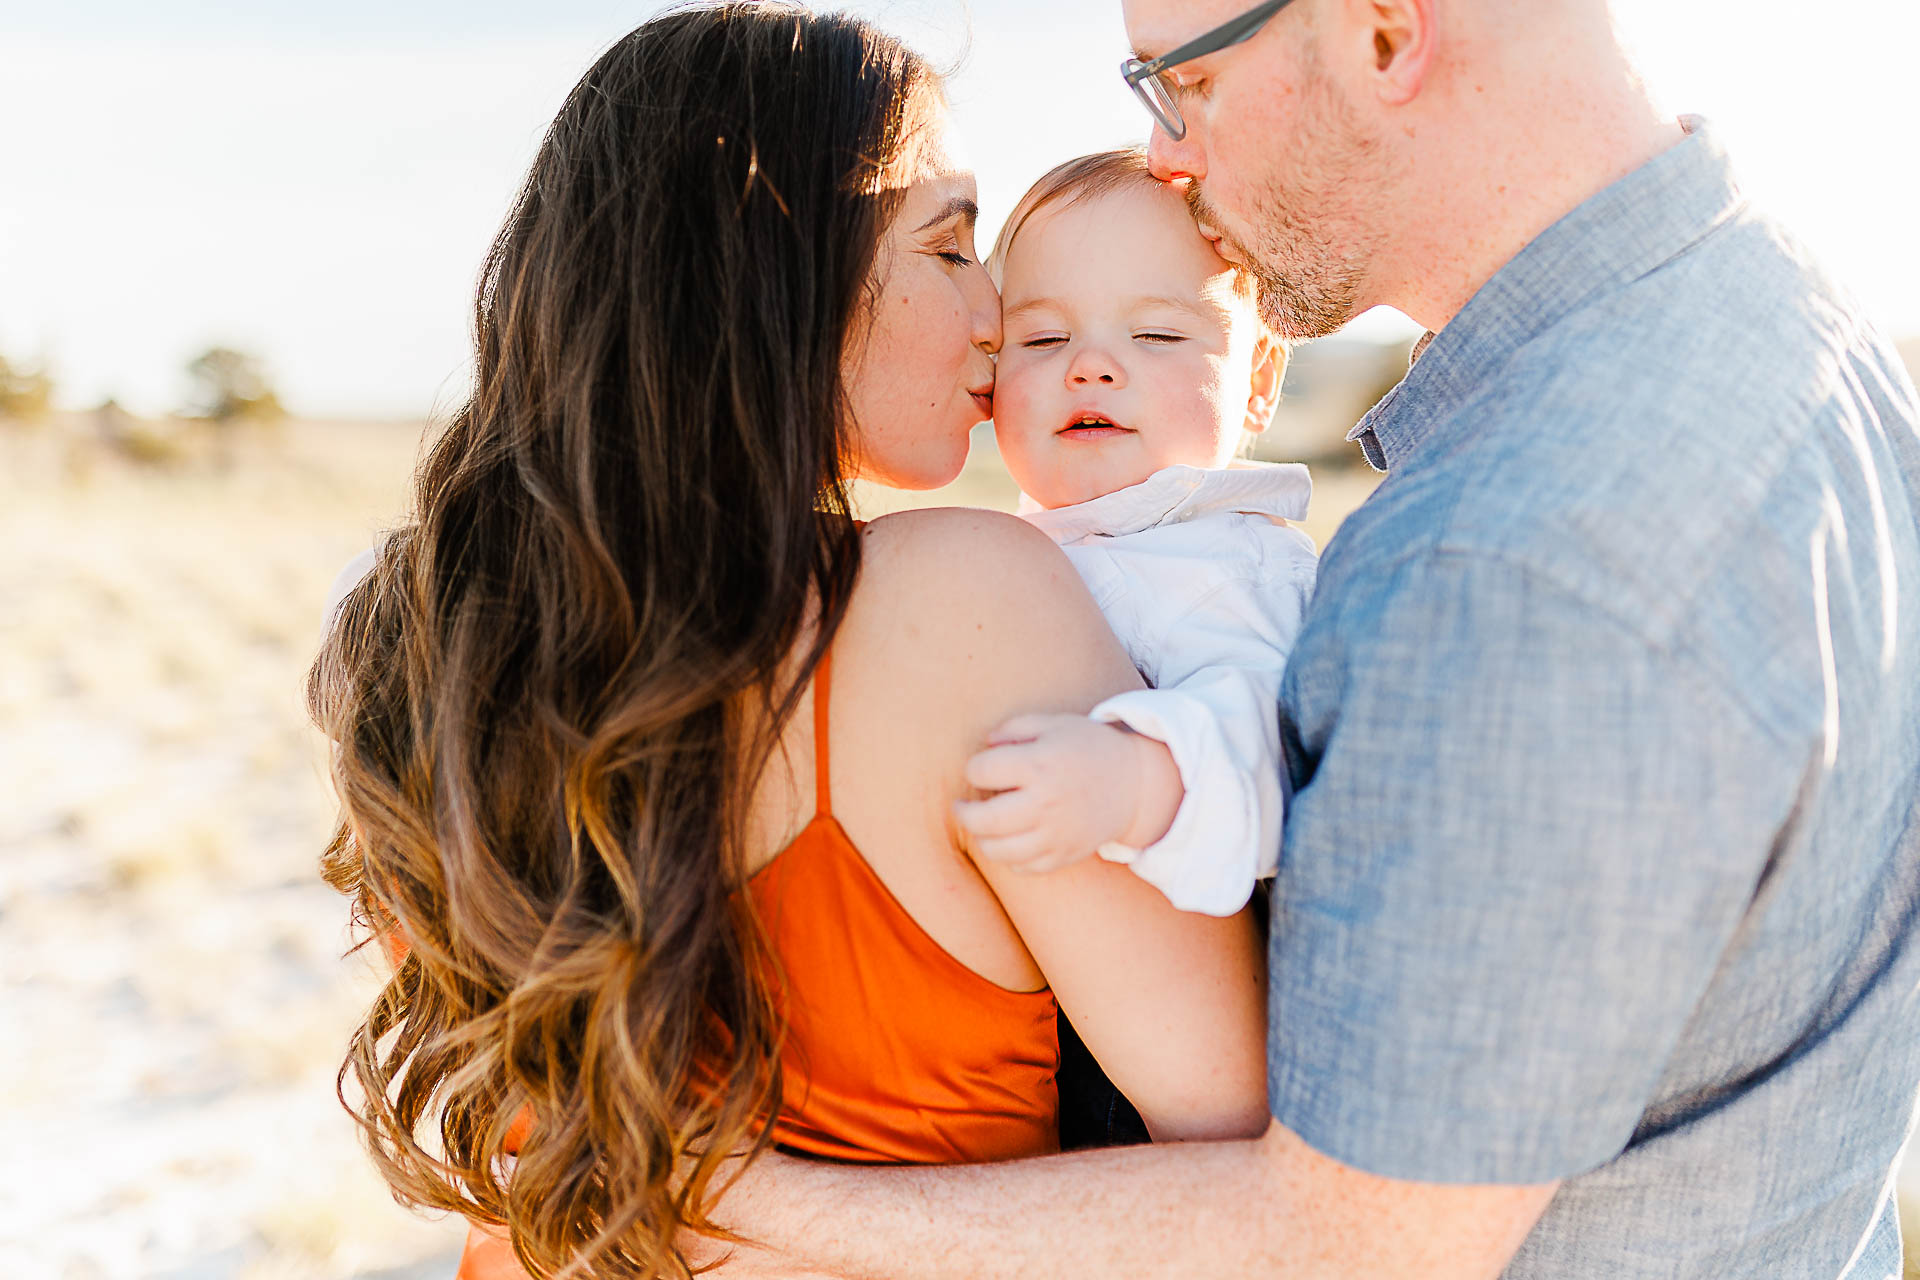 Photo by Norwell Family Photographer Christina Runnals | Family portraits on the beach